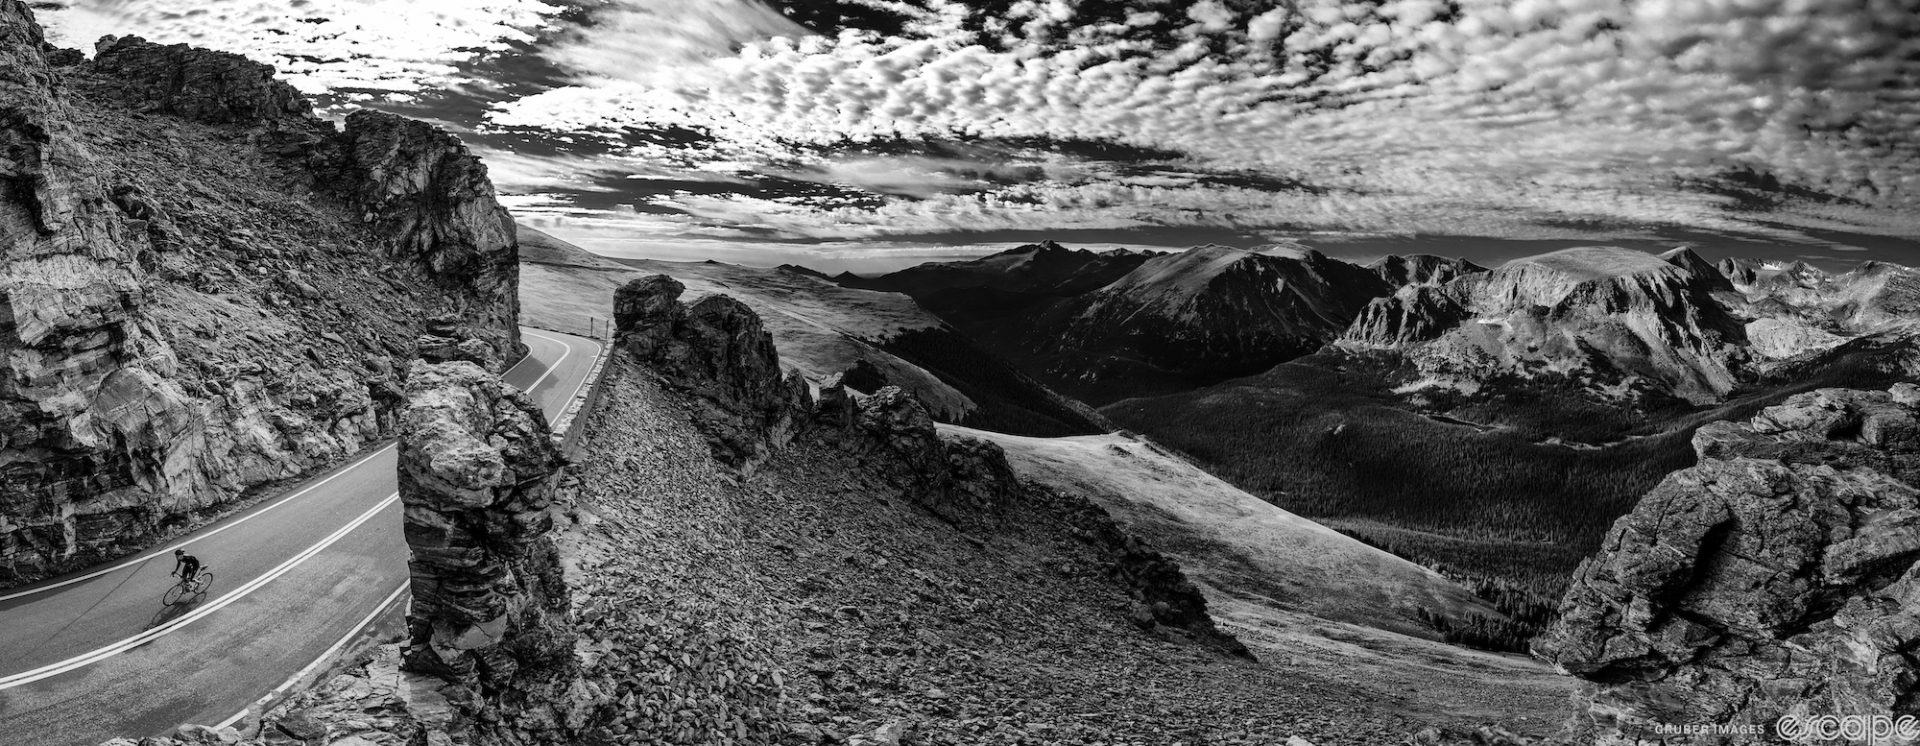 A lone rider climbs on a moon-like rockscape high in the Colorado Rockies in this black and white shot, with white clouds popping against a dark sky.